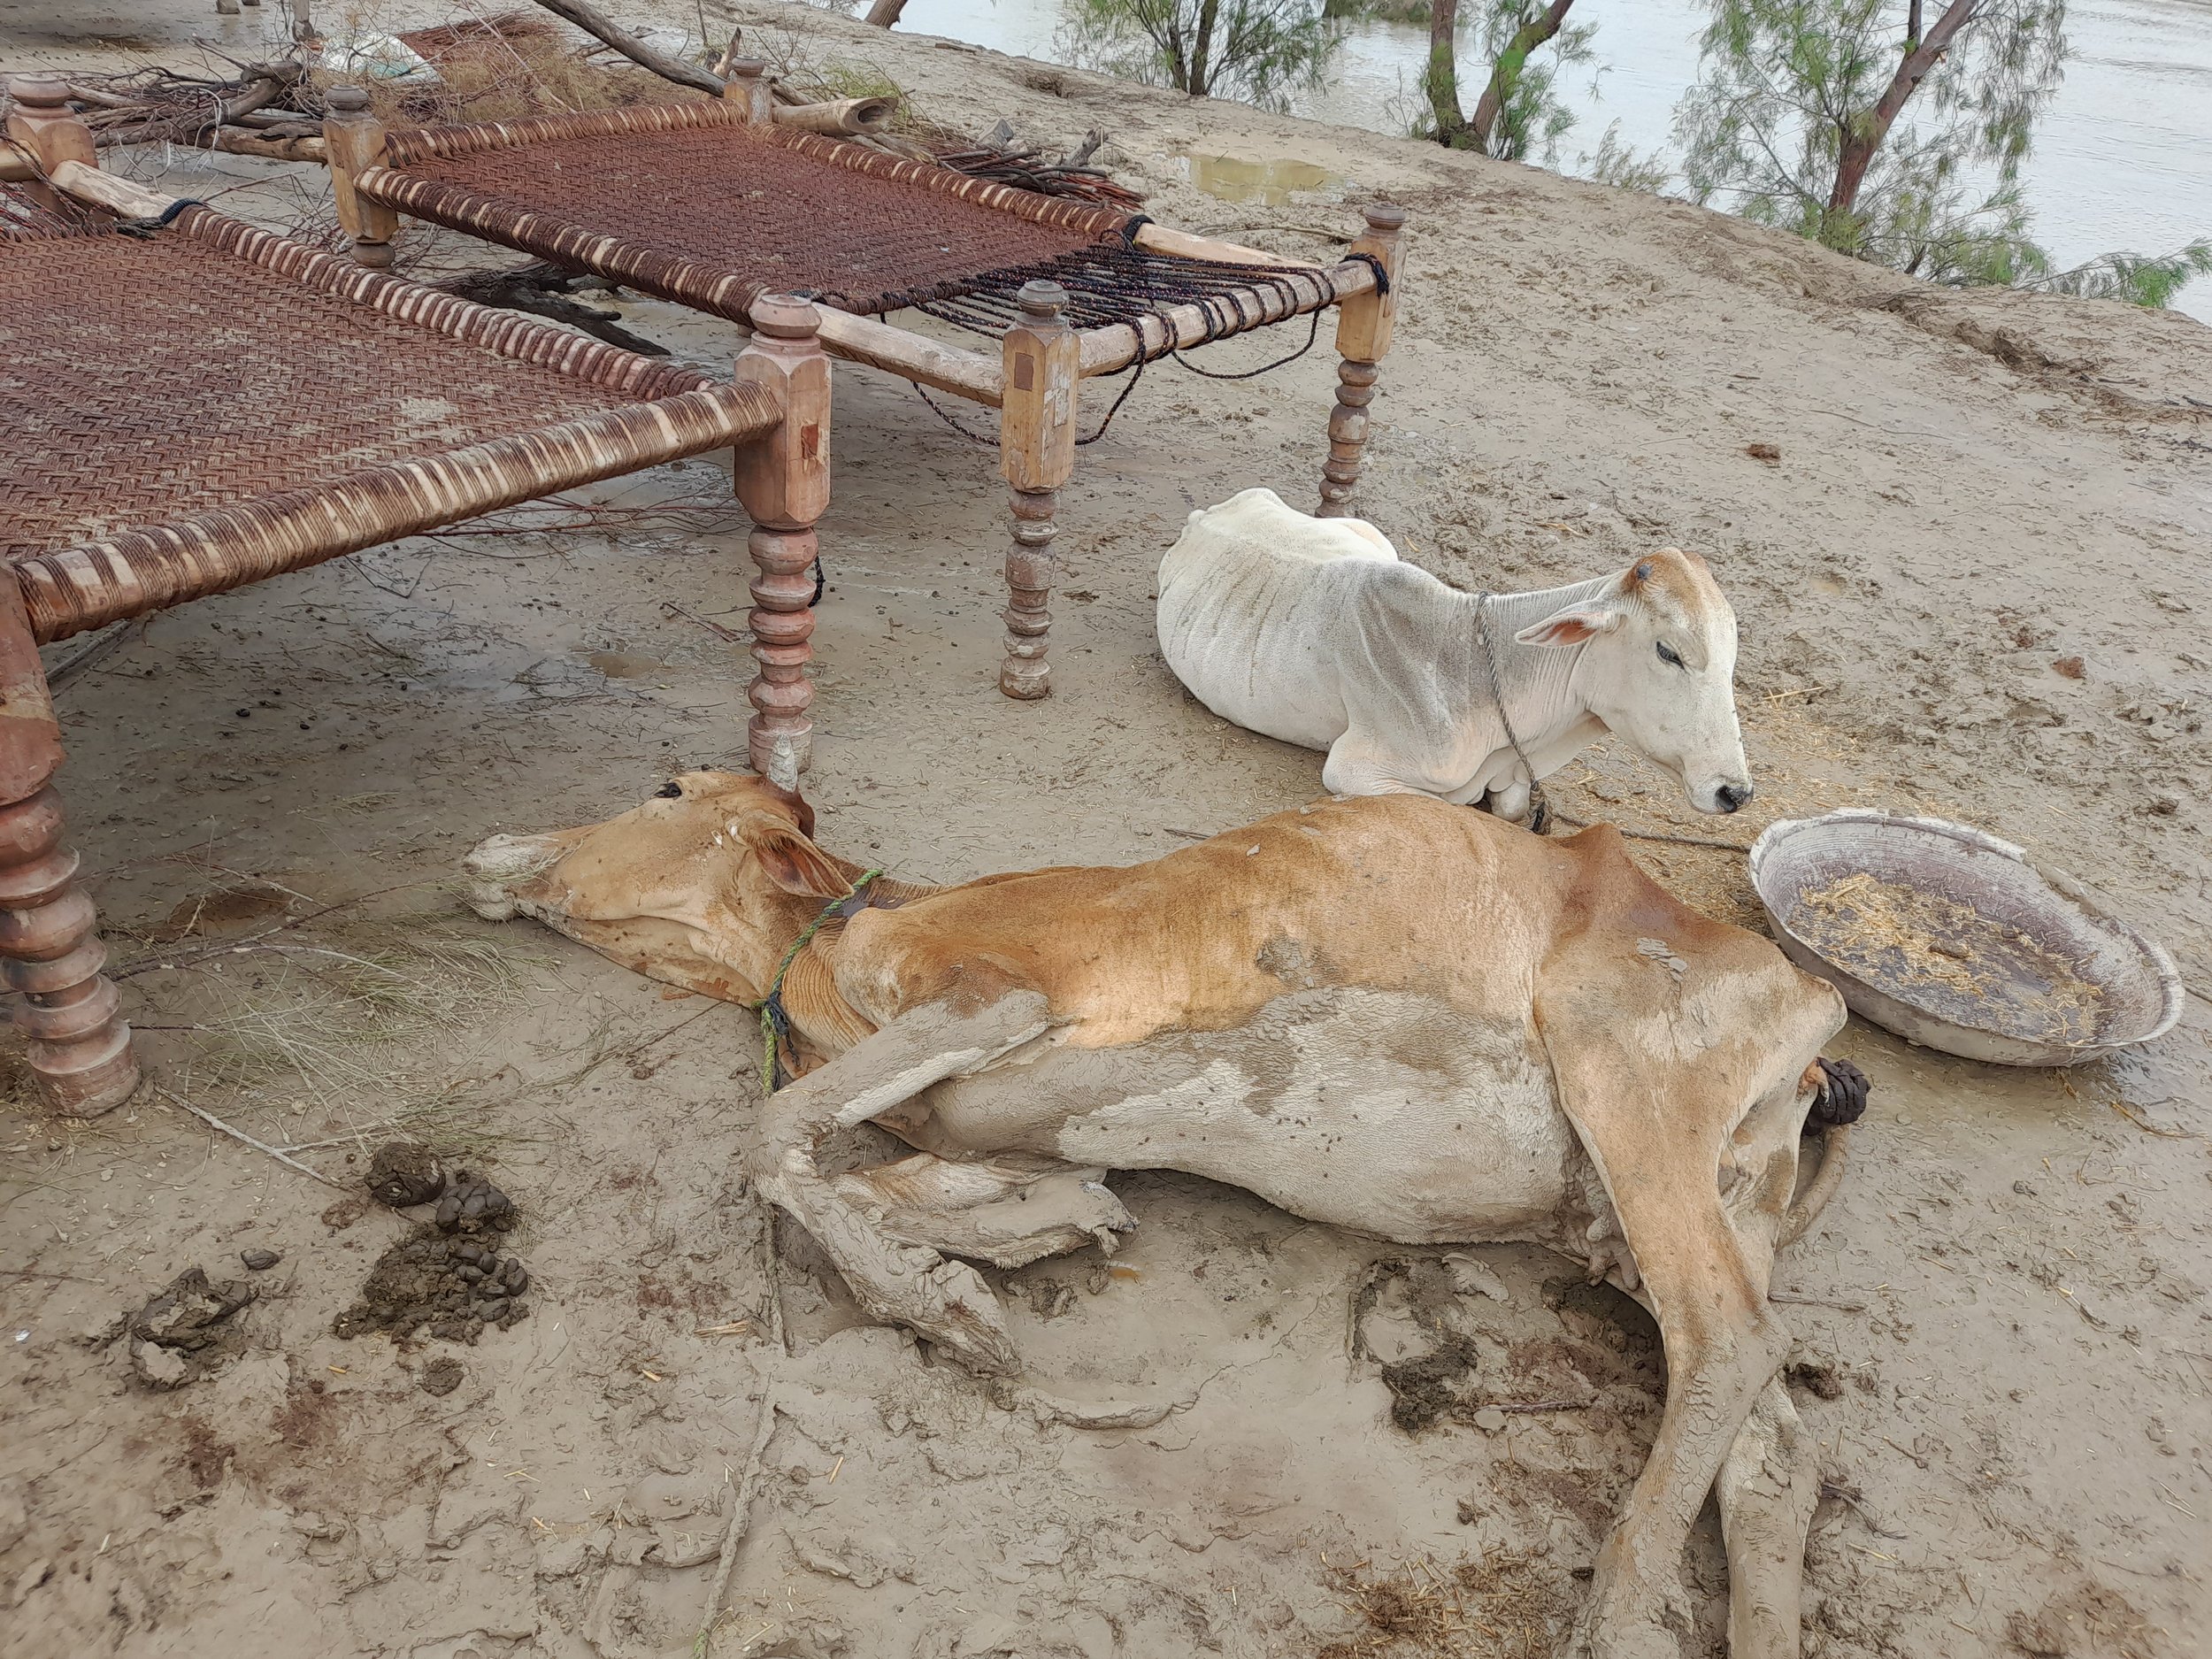 Cattle and livestock are wasting away from starvation as the floods have destroyed the grasslands they use to graze on.